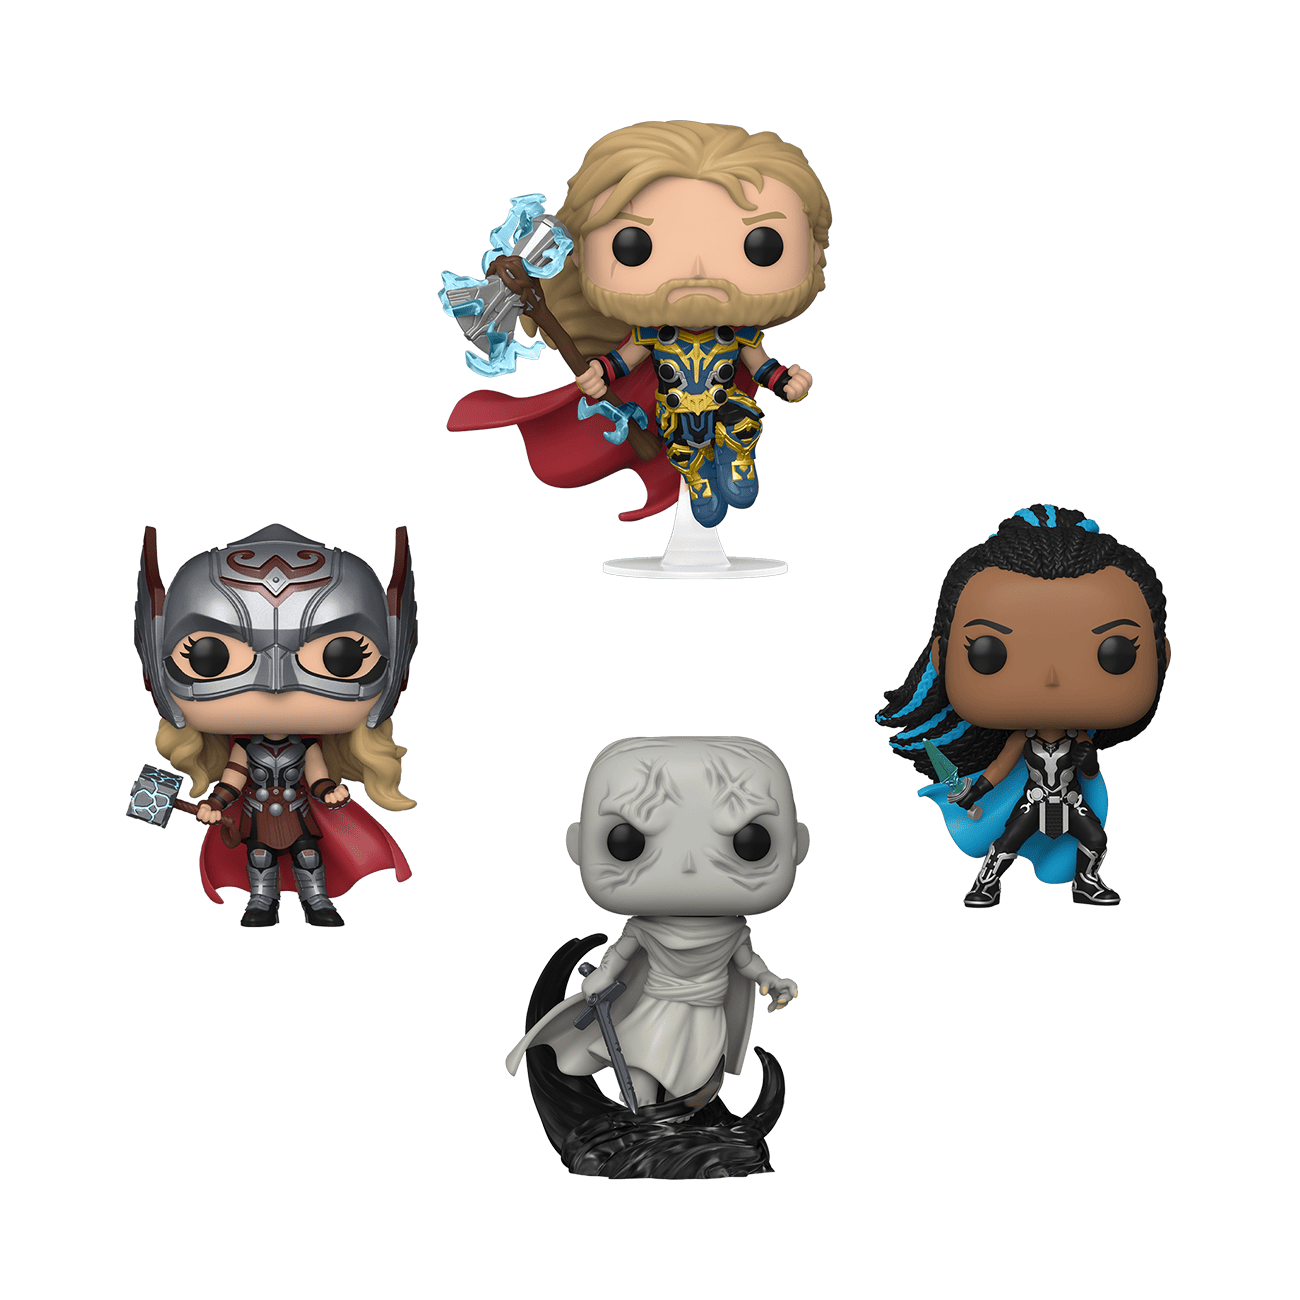 Funko Pop! Thor 4: Love and Thunder - Mighty Thor Glow in the Dark #10